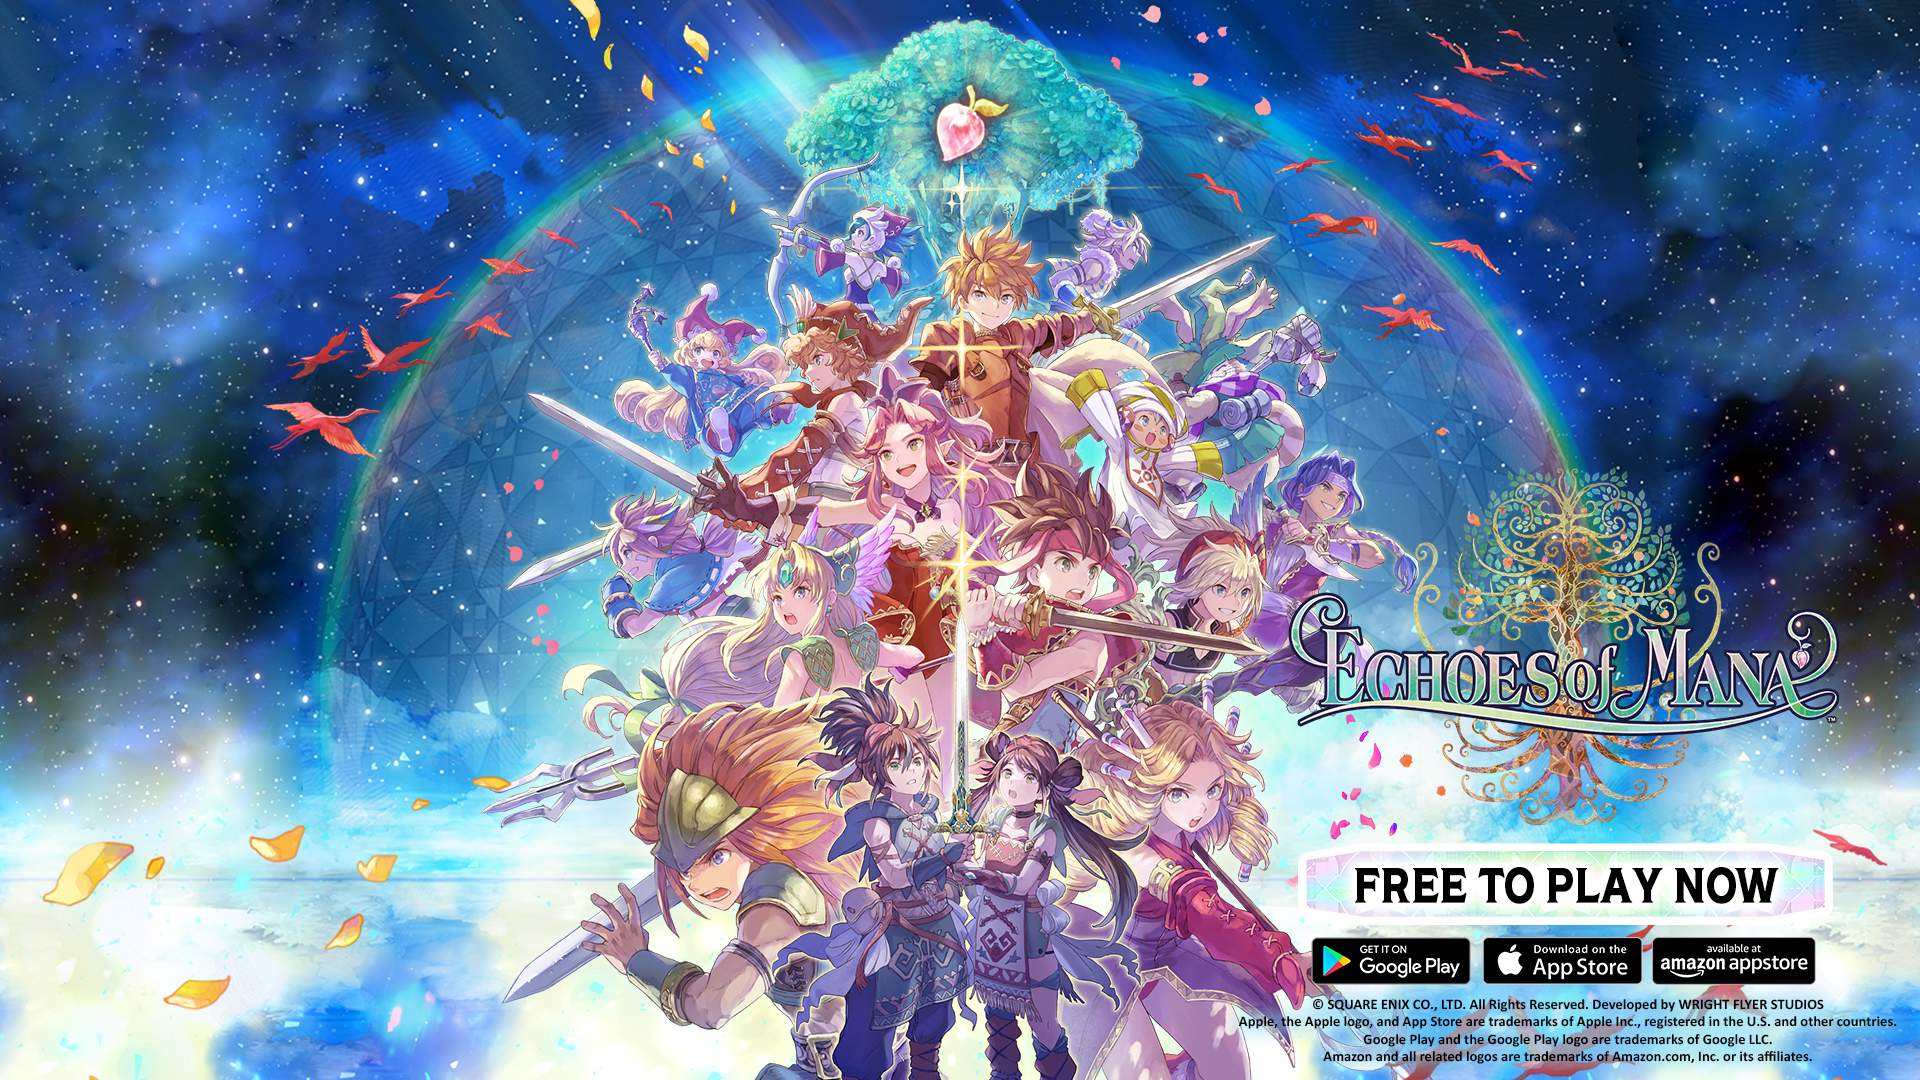 Mana series characters gather around the Mana tree for the launch of Echoes of Mana